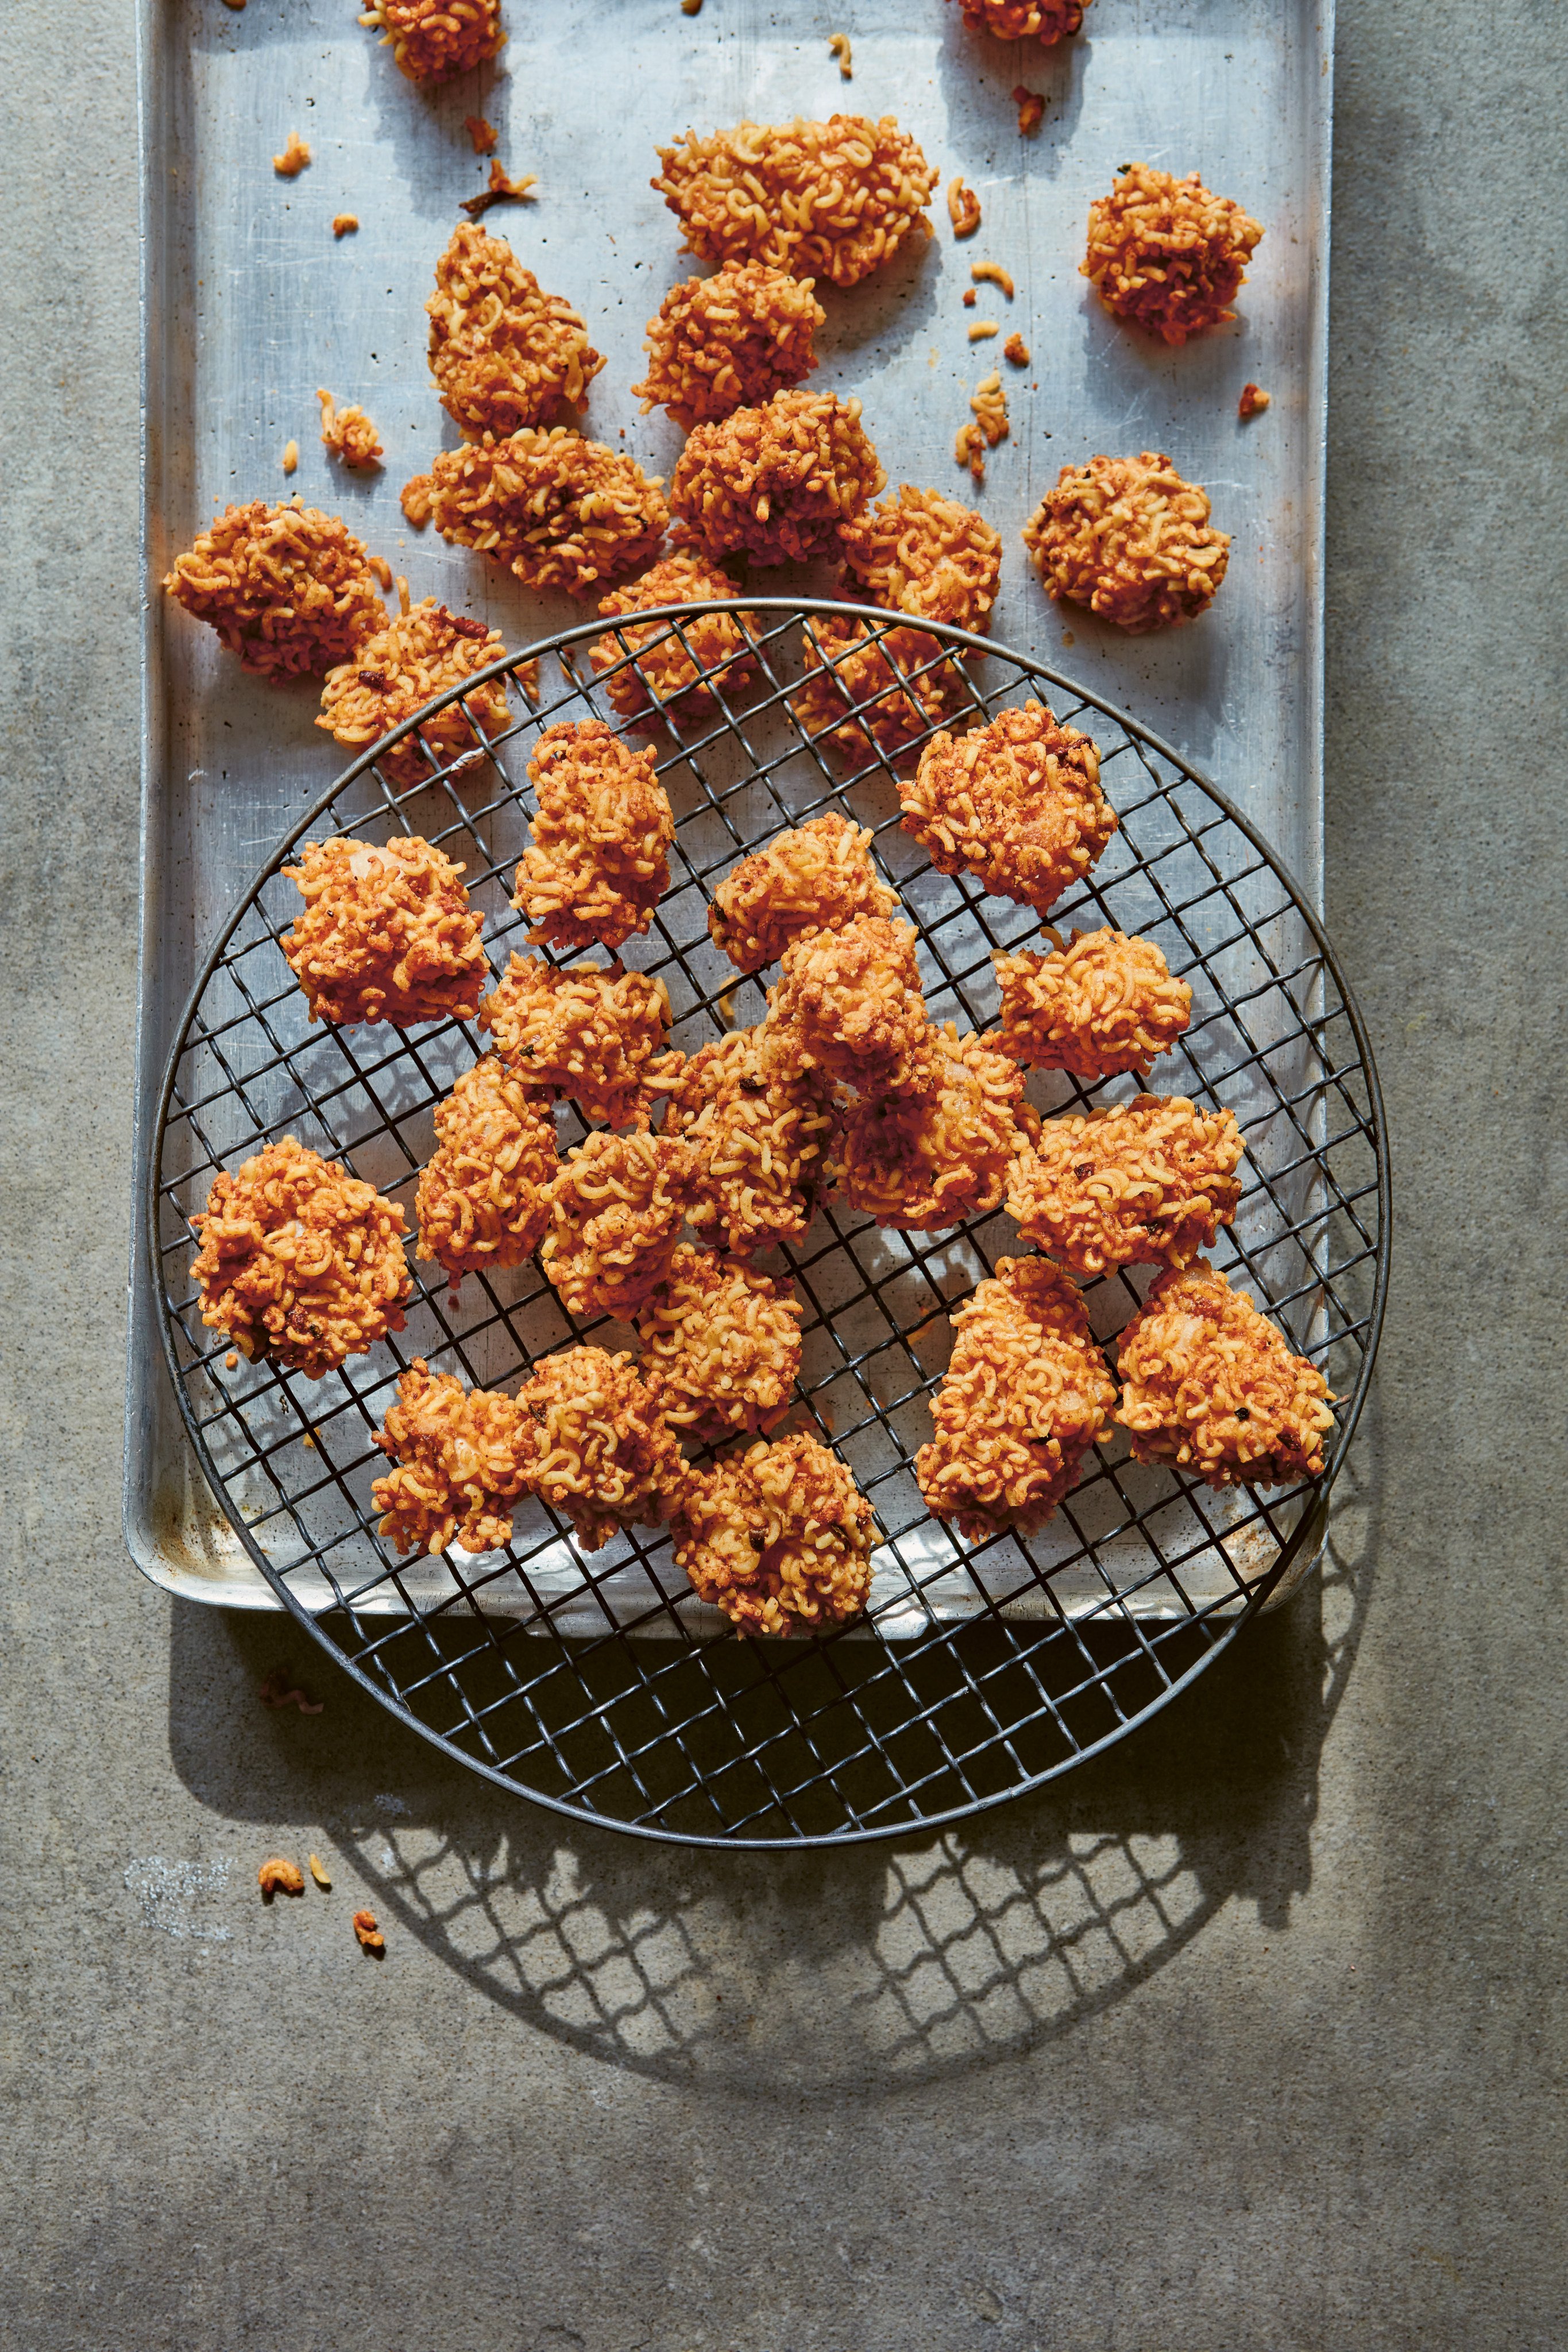 Chicken poppers with instant noodles combines two of Susan Jung’s favourite foods. Photo: Quadrille Publishing